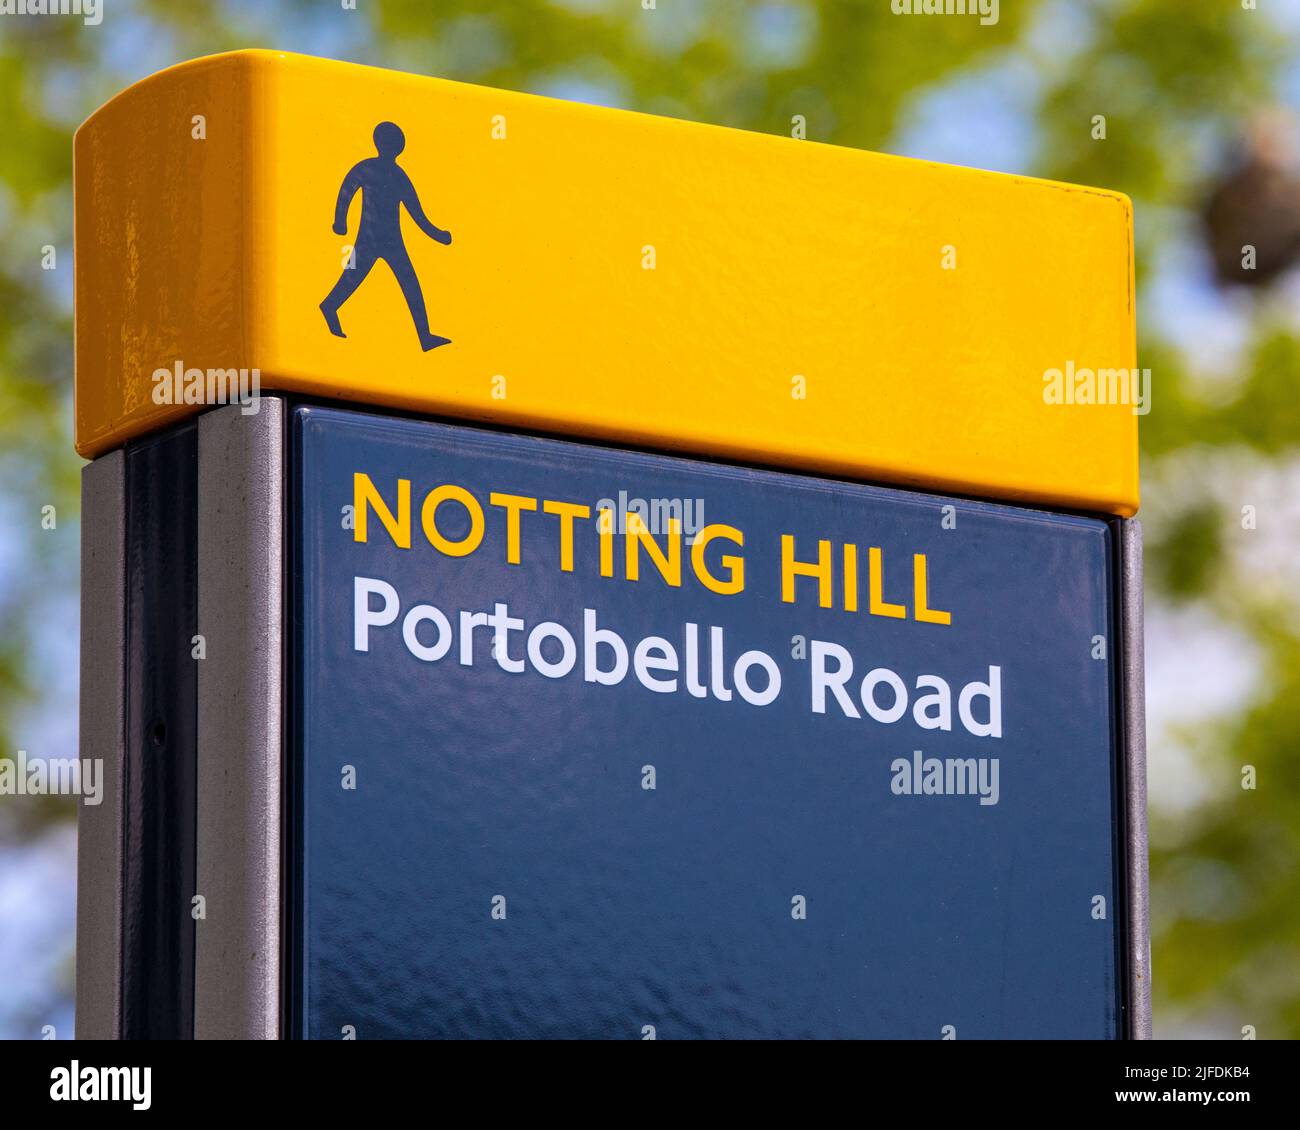 London, UK - May 5th 2022: Pedestrian sign for Portobello Road in the Notting Hill district of Kensington in London, UK. Stock Photo